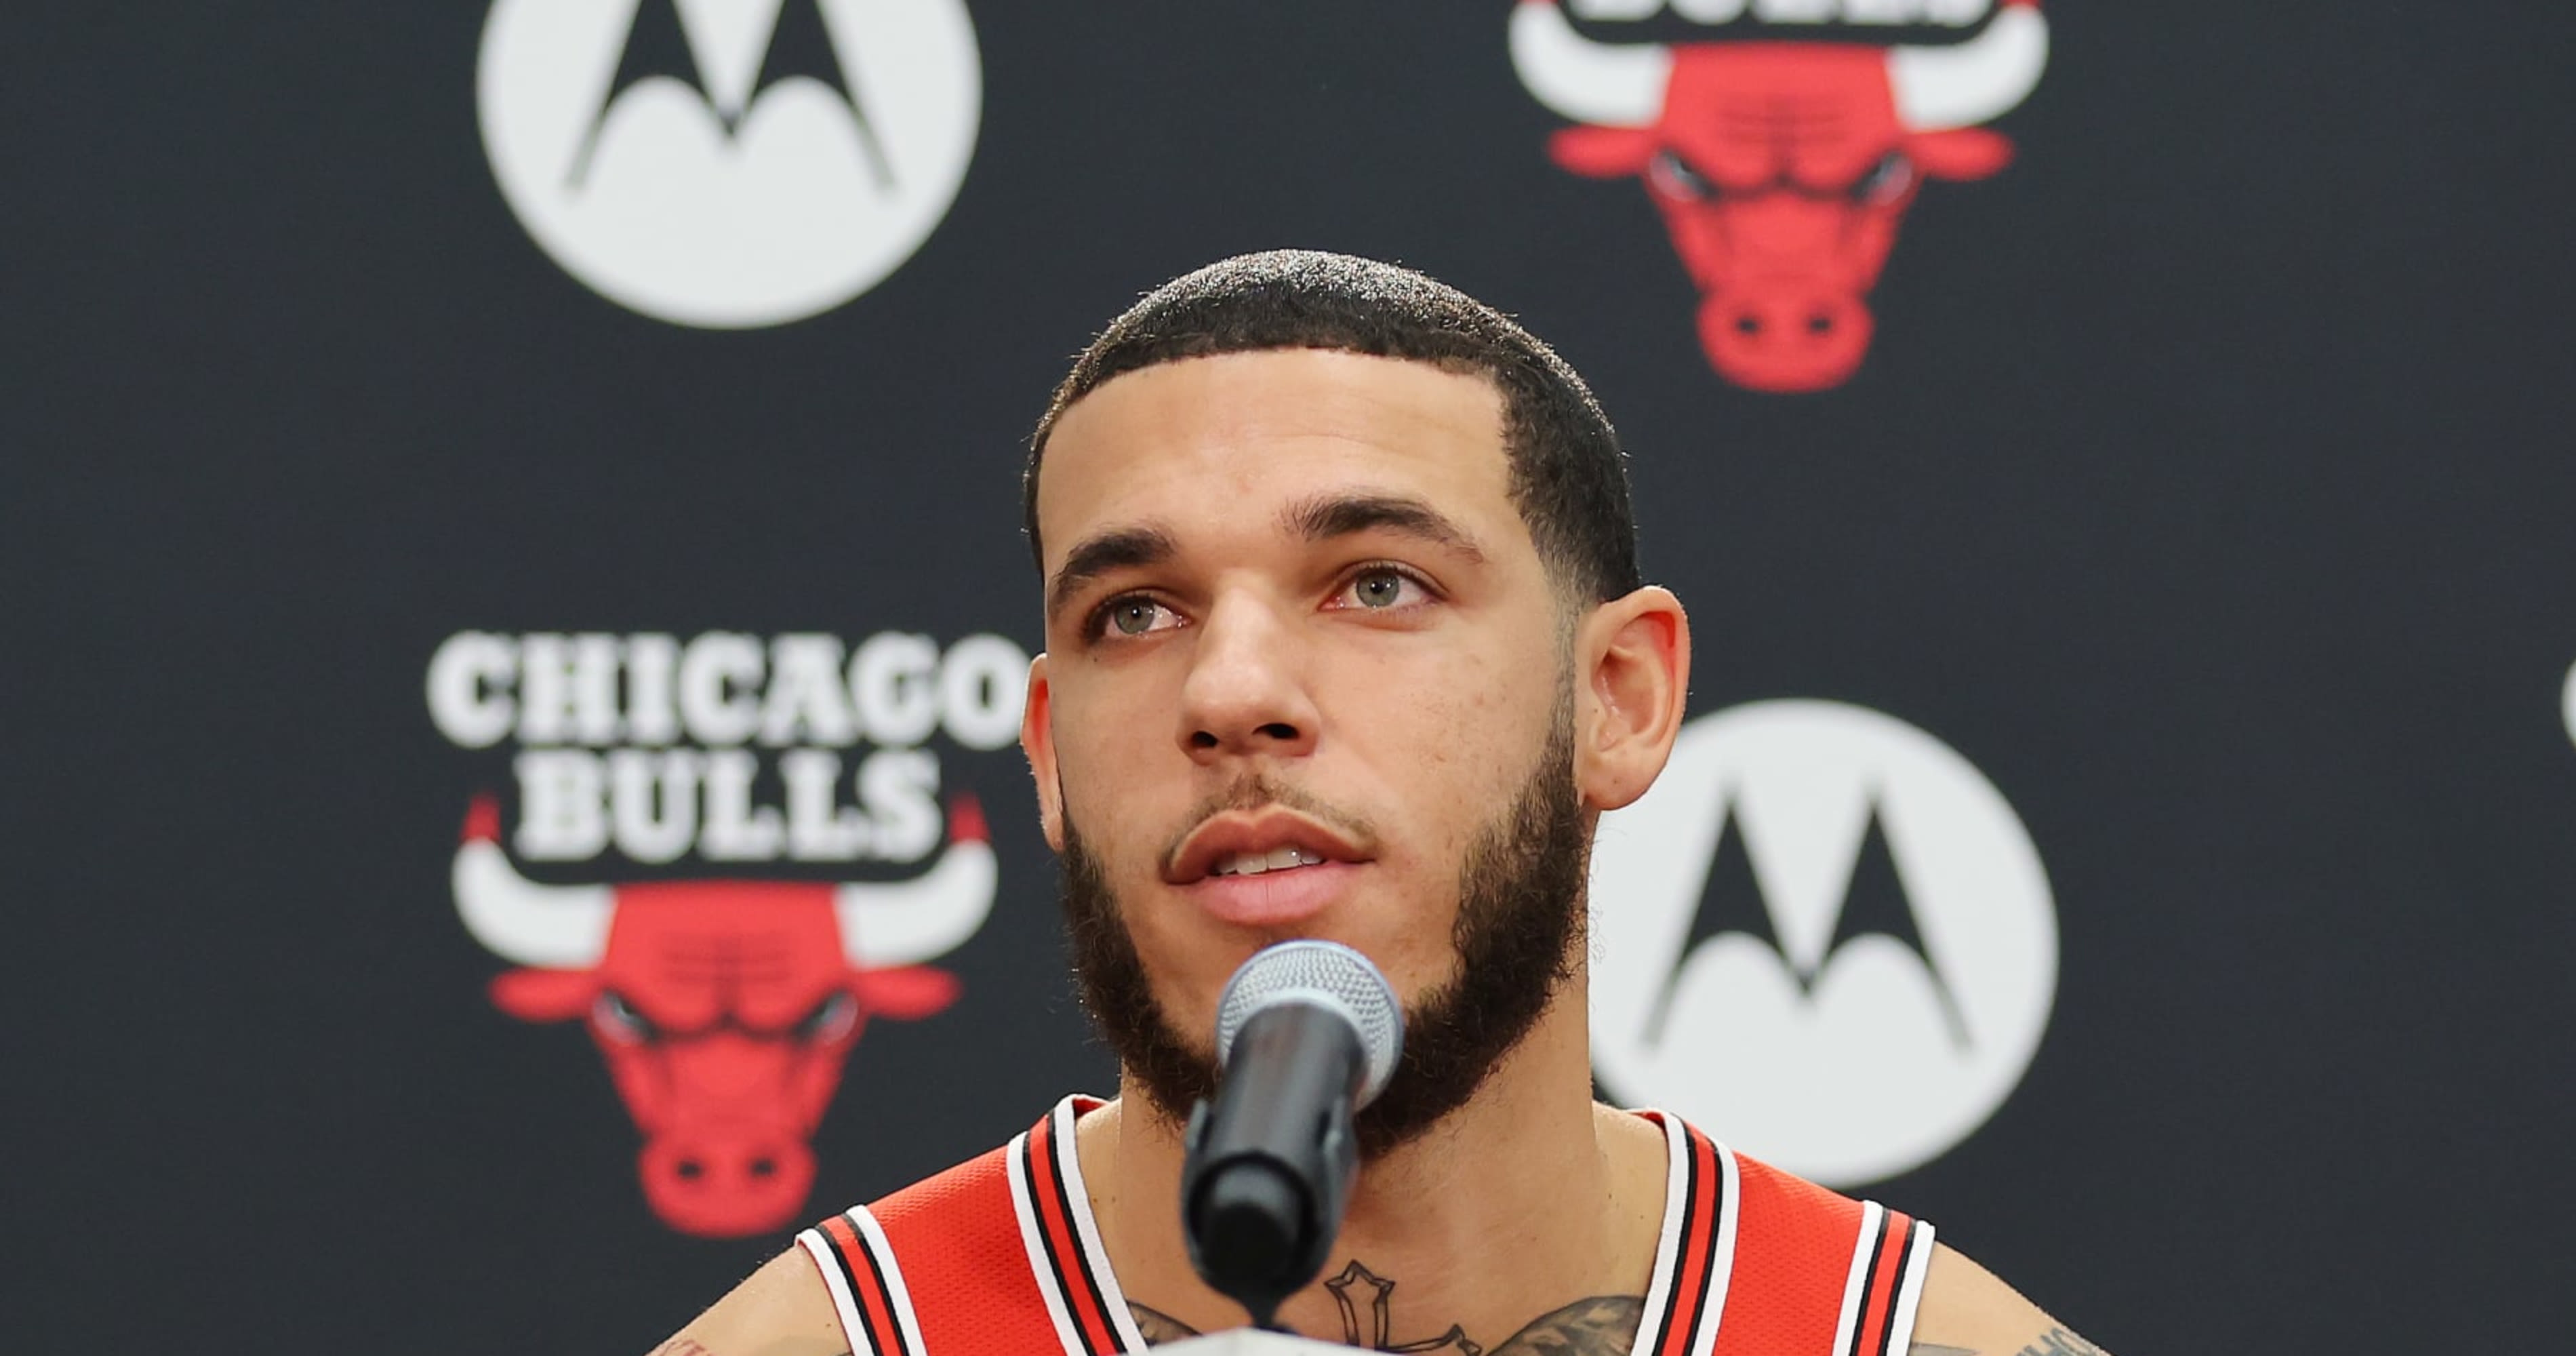 Bulls' Lonzo Ball Says He's 'About 70' Percent Recovered from Knee Injury amid Rehab